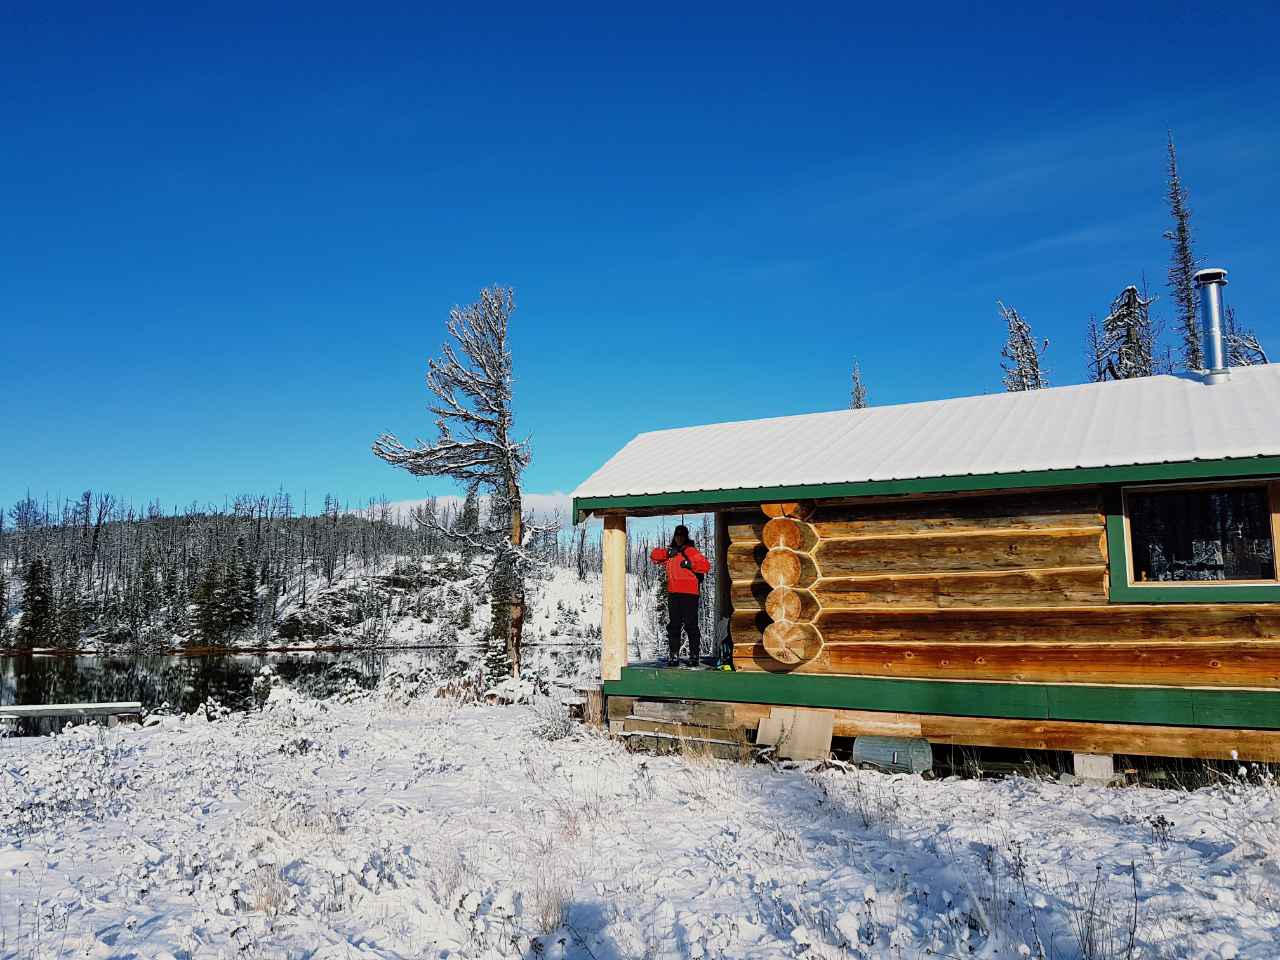 The overnight cabin run by Tweedsmuir Ski Club in snow covered meadow and next to fresh water lake